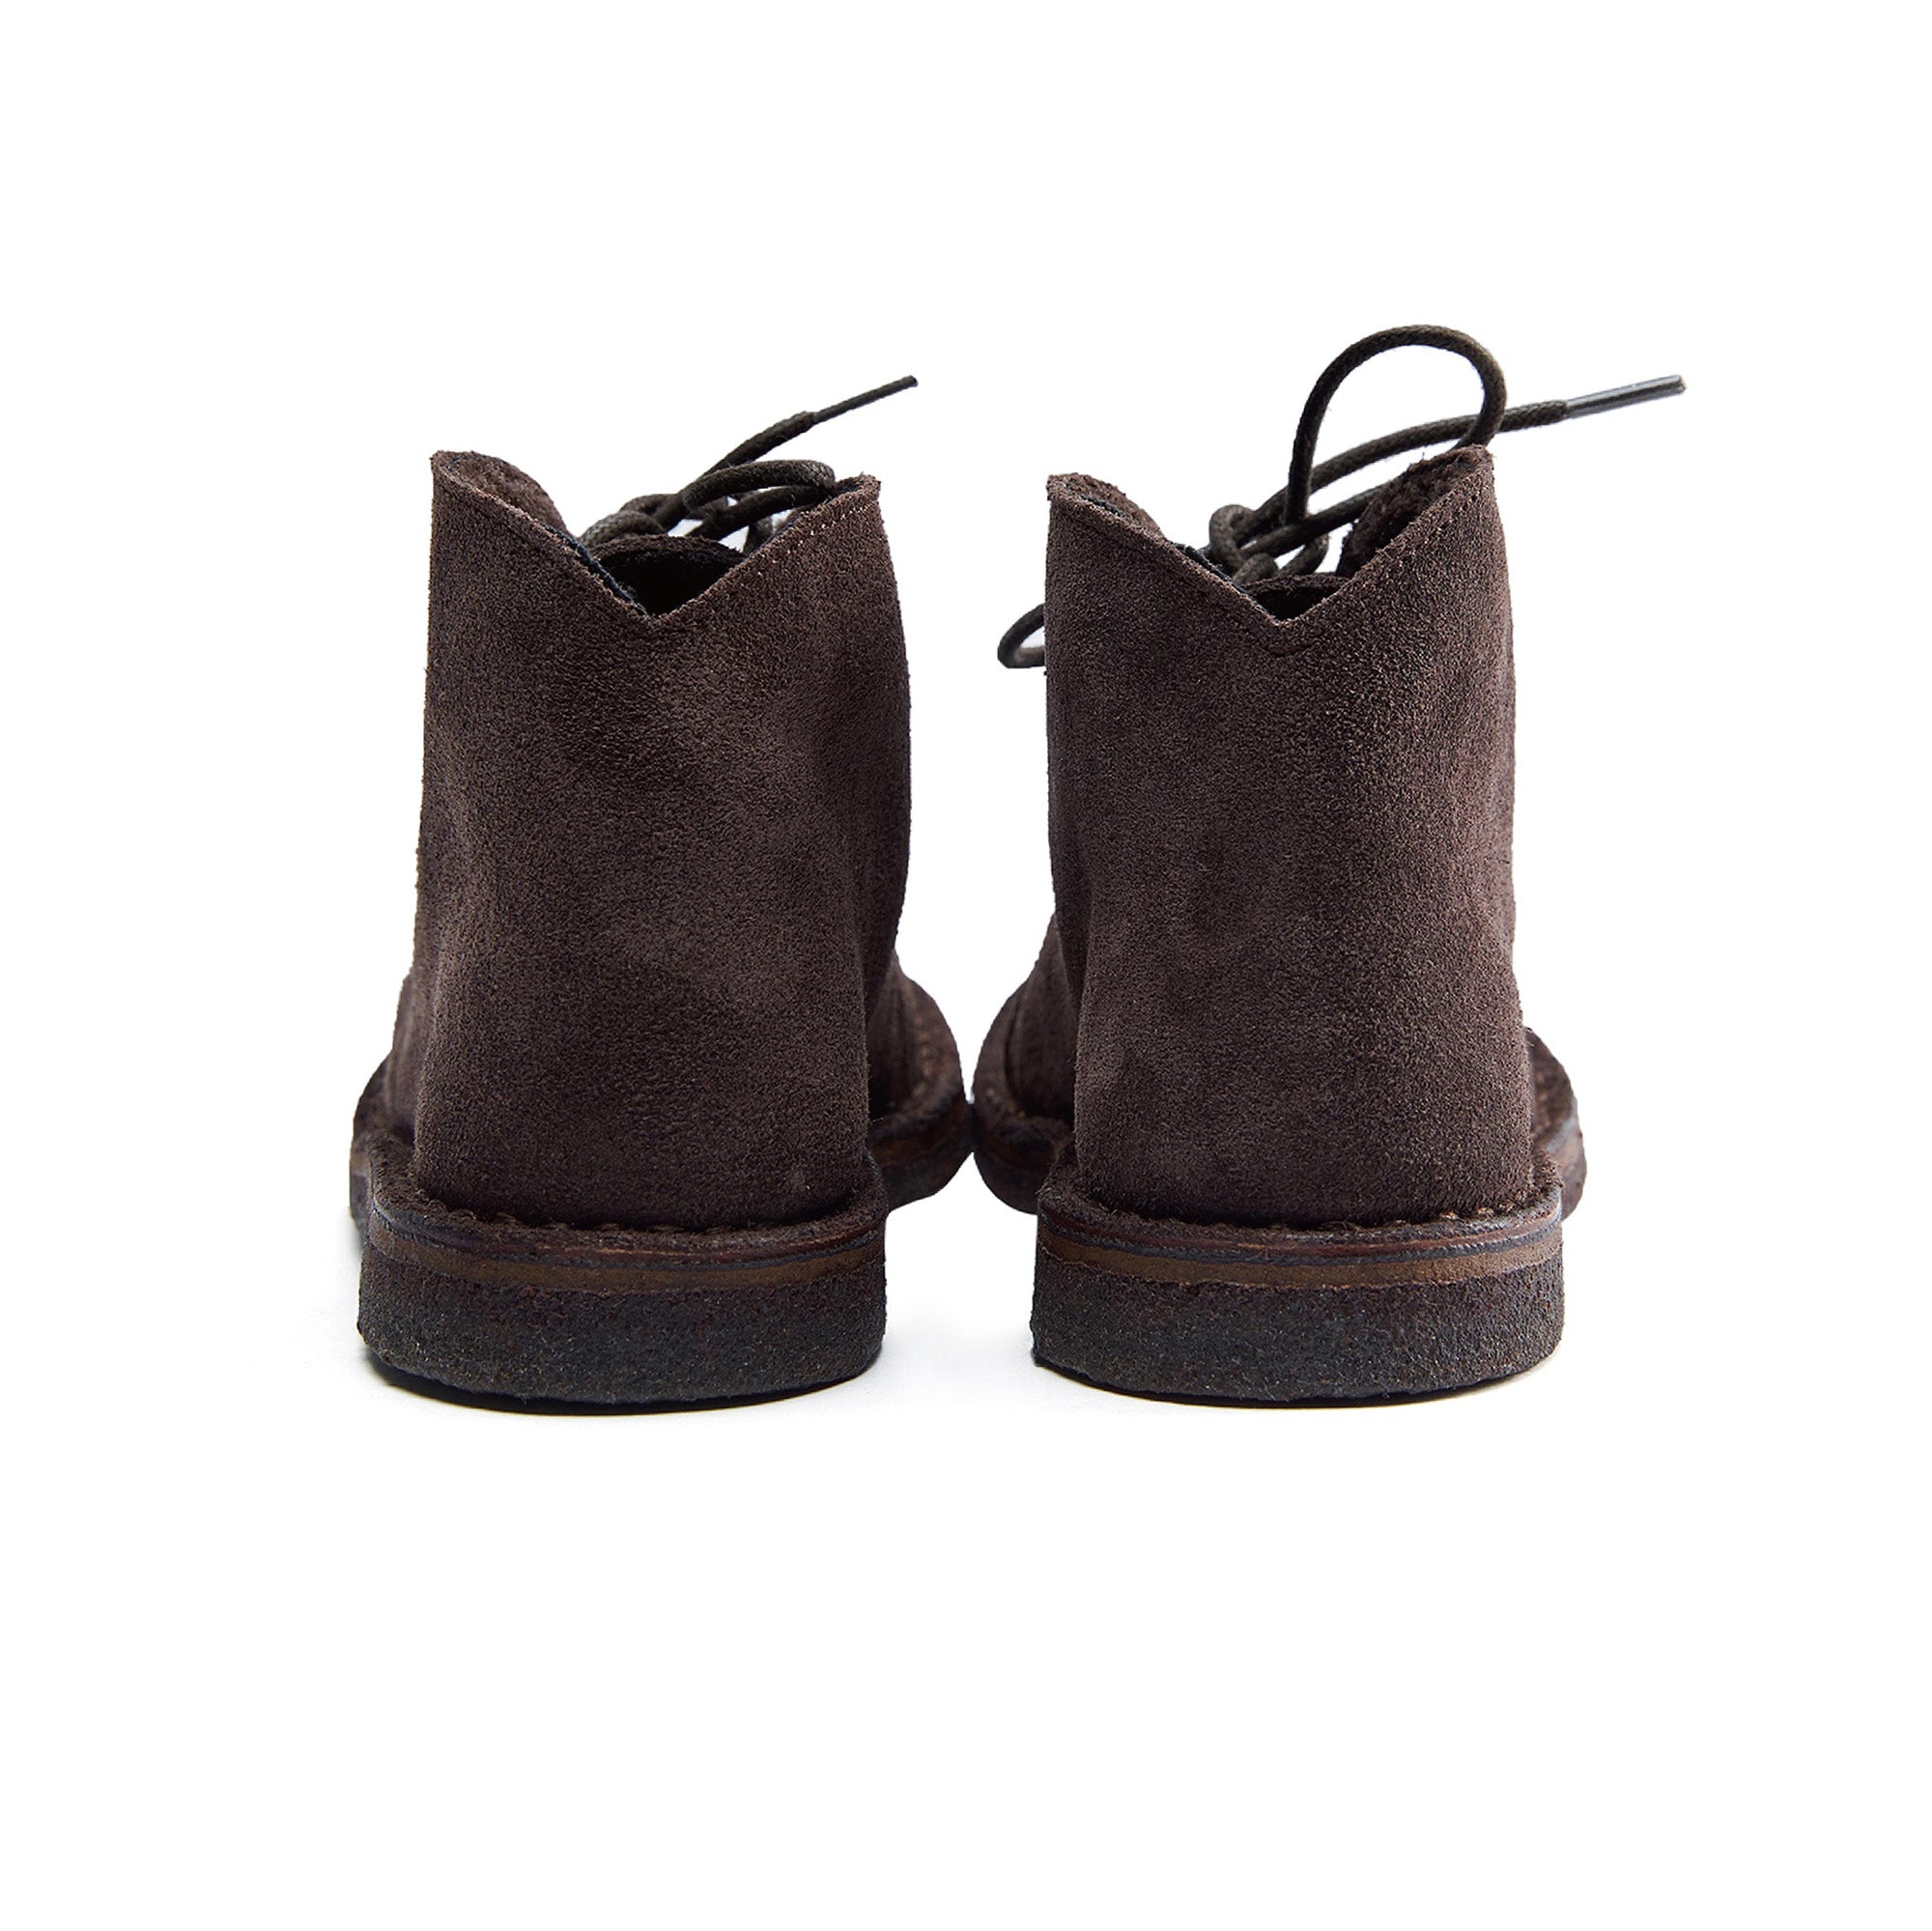 Boys & Girls Dark Brown Leather Shoes